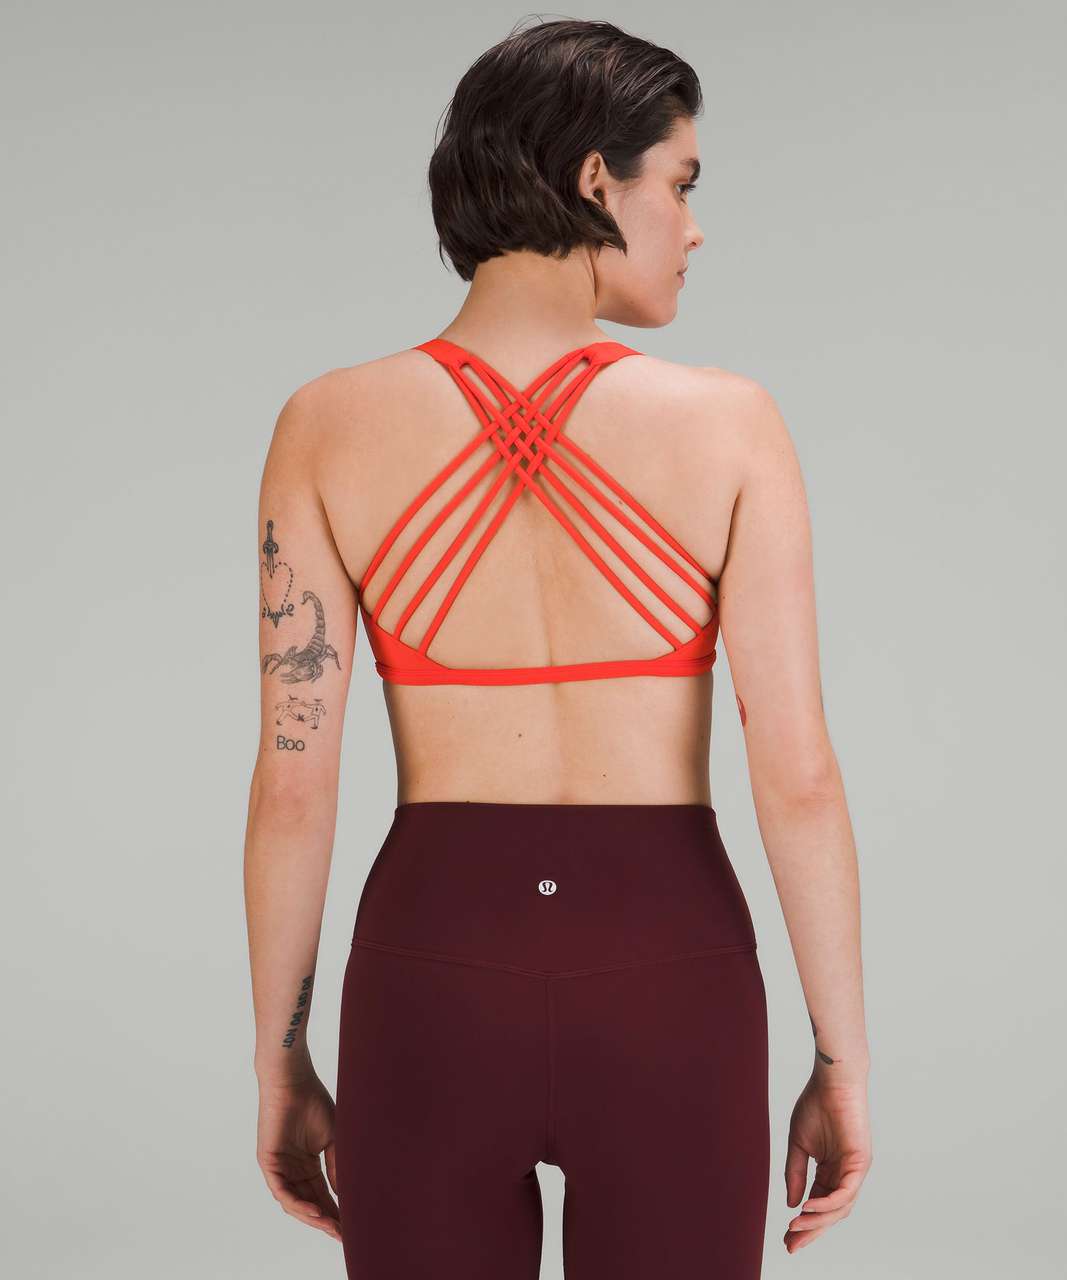 For the Oranges lover Of this world - energy bra in golden bra paired with  athleta's elation crossover in flame orange : r/lululemon